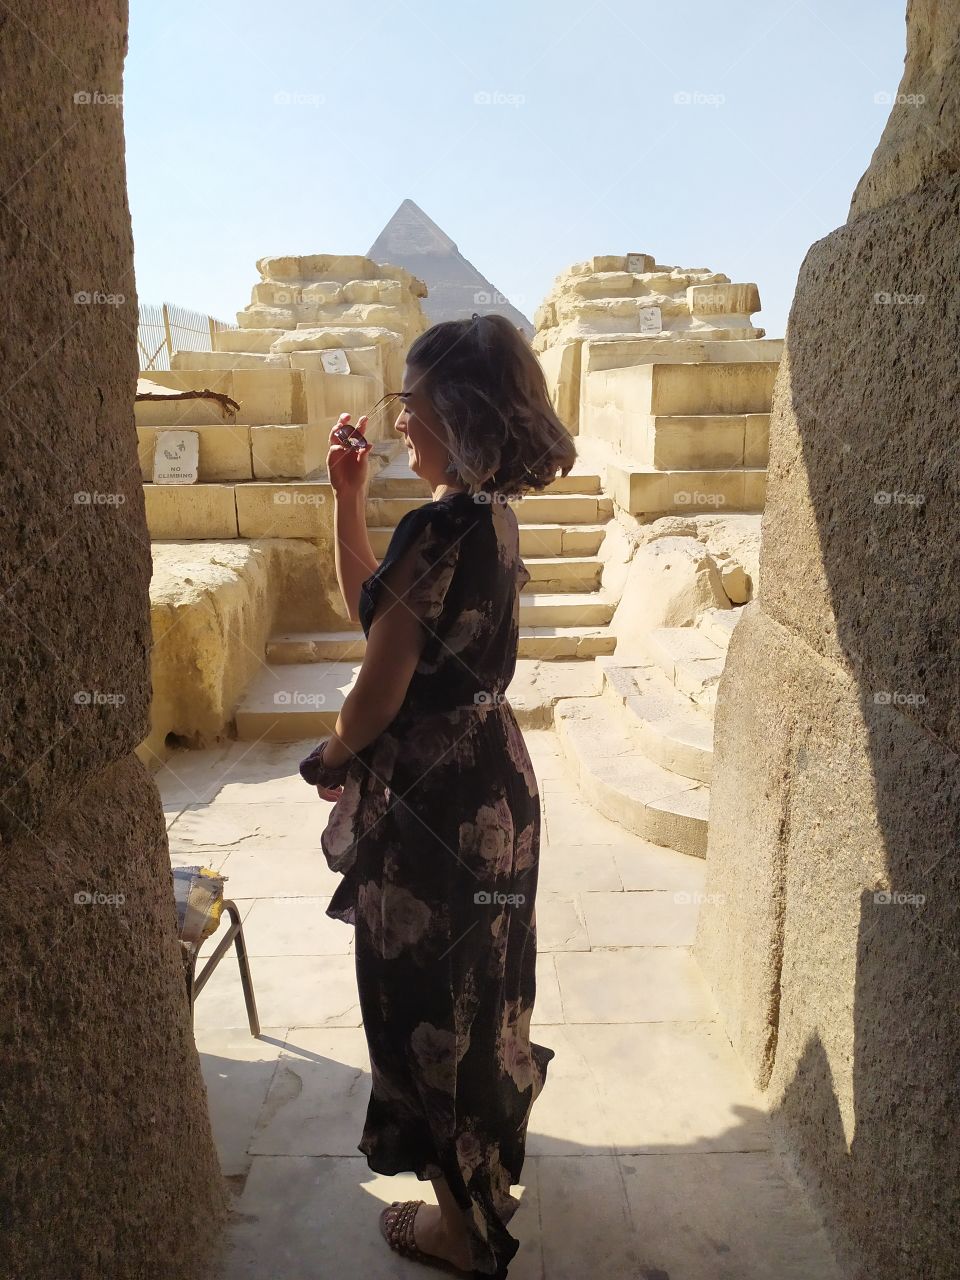 she stand on the cause way between Sphinx and pyramids with amazing photo very action.